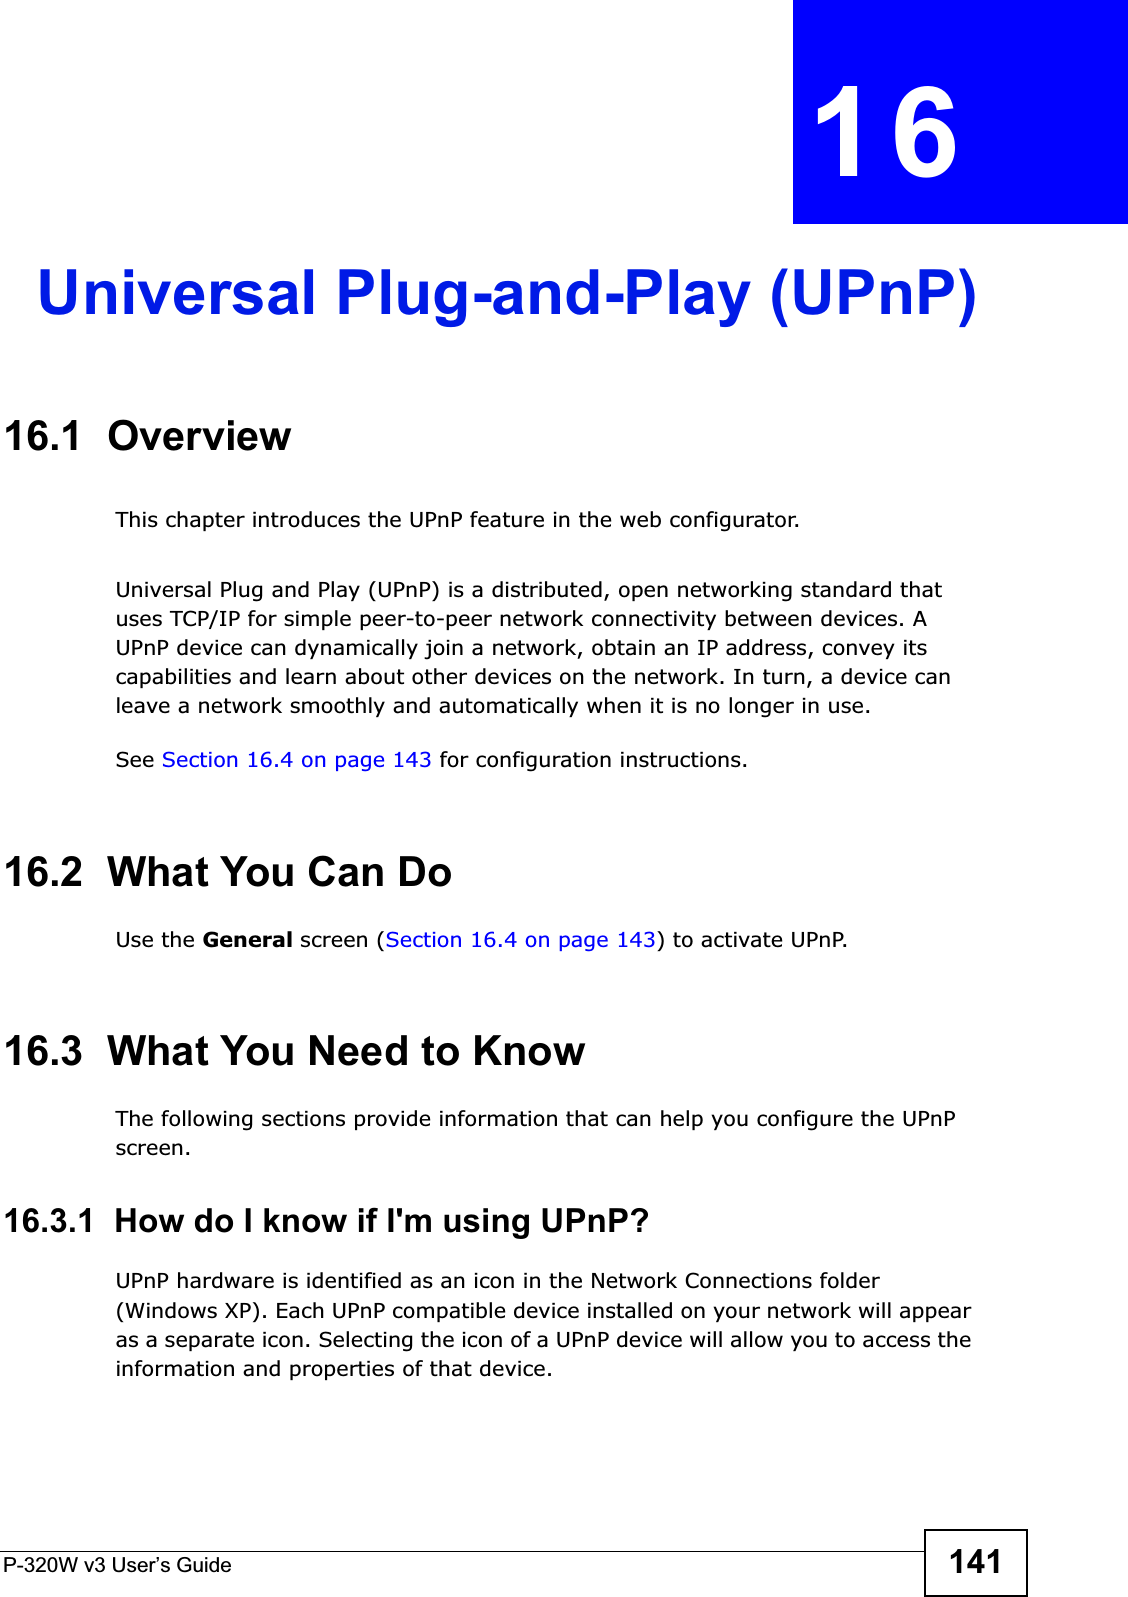 P-320W v3 User’s Guide 141CHAPTER 16Universal Plug-and-Play (UPnP)16.1  OverviewThis chapter introduces the UPnP feature in the web configurator.Universal Plug and Play (UPnP) is a distributed, open networking standard that uses TCP/IP for simple peer-to-peer network connectivity between devices. A UPnP device can dynamically join a network, obtain an IP address, convey its capabilities and learn about other devices on the network. In turn, a device can leave a network smoothly and automatically when it is no longer in use.See Section 16.4 on page 143 for configuration instructions.16.2  What You Can DoUse the General screen (Section 16.4 on page 143) to activate UPnP.16.3  What You Need to KnowThe following sections provide information that can help you configure the UPnP screen. 16.3.1  How do I know if I&apos;m using UPnP? UPnP hardware is identified as an icon in the Network Connections folder (Windows XP). Each UPnP compatible device installed on your network will appear as a separate icon. Selecting the icon of a UPnP device will allow you to access the information and properties of that device. 